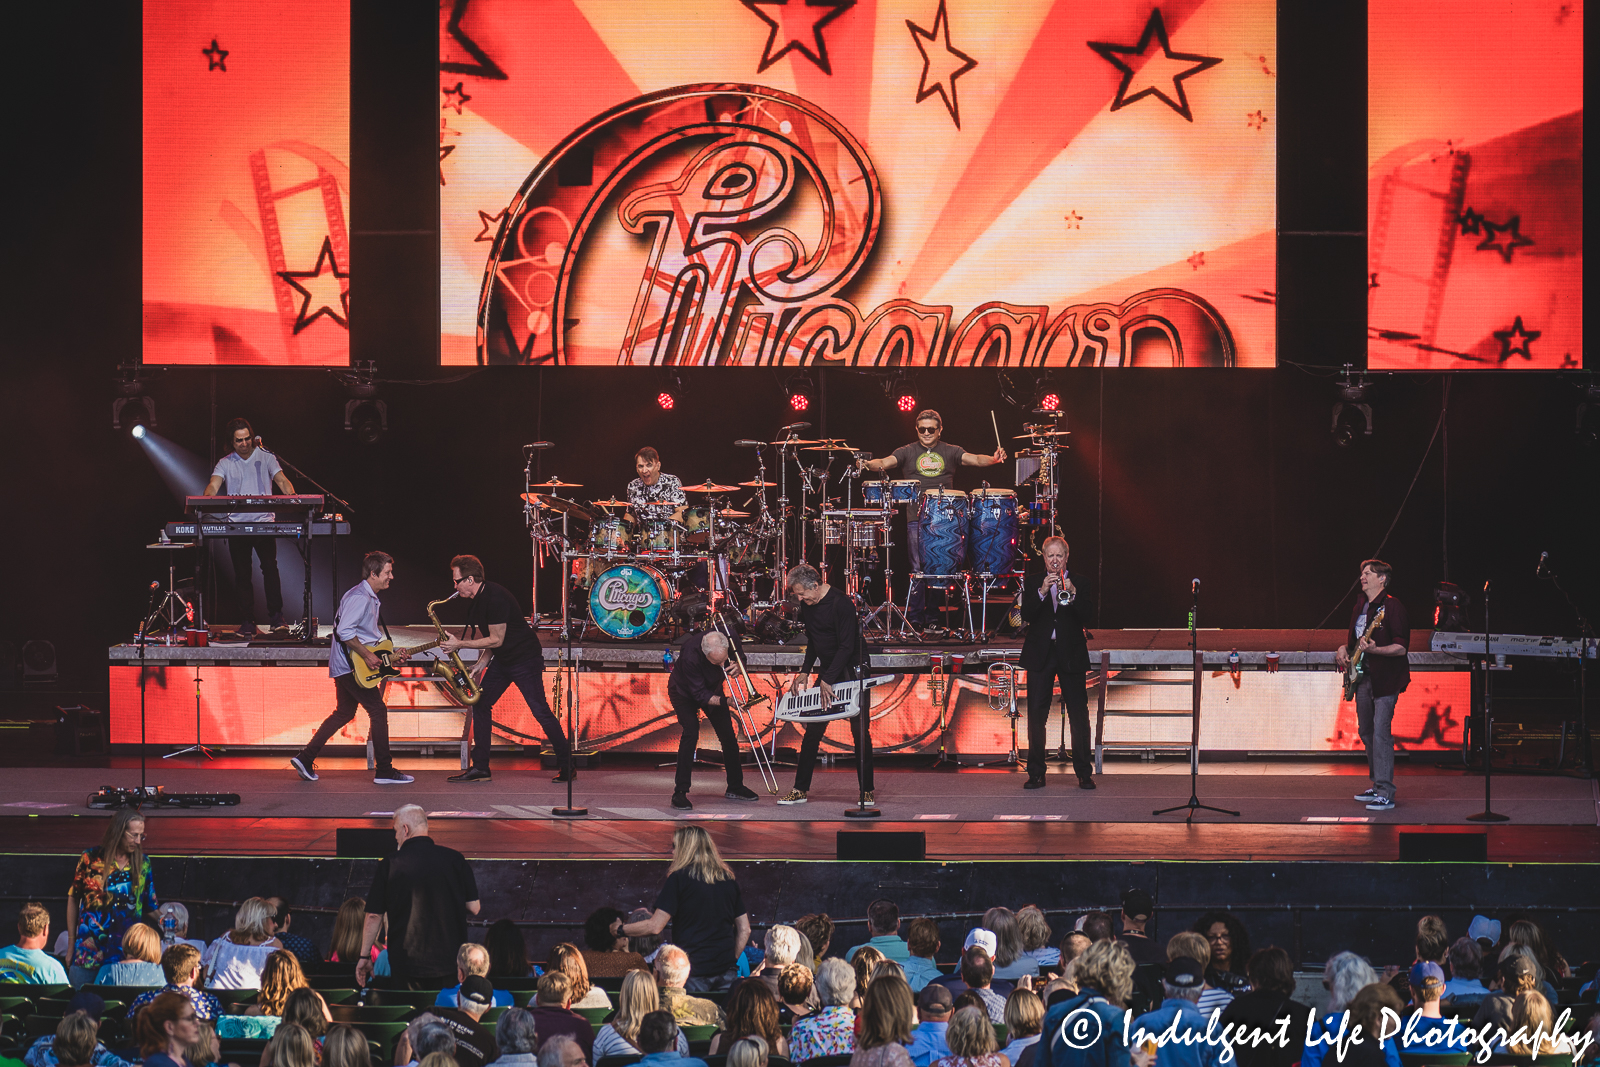 Chicago the band performing live in concert at Kansas City's Starlight Theatre on May 26, 2023.